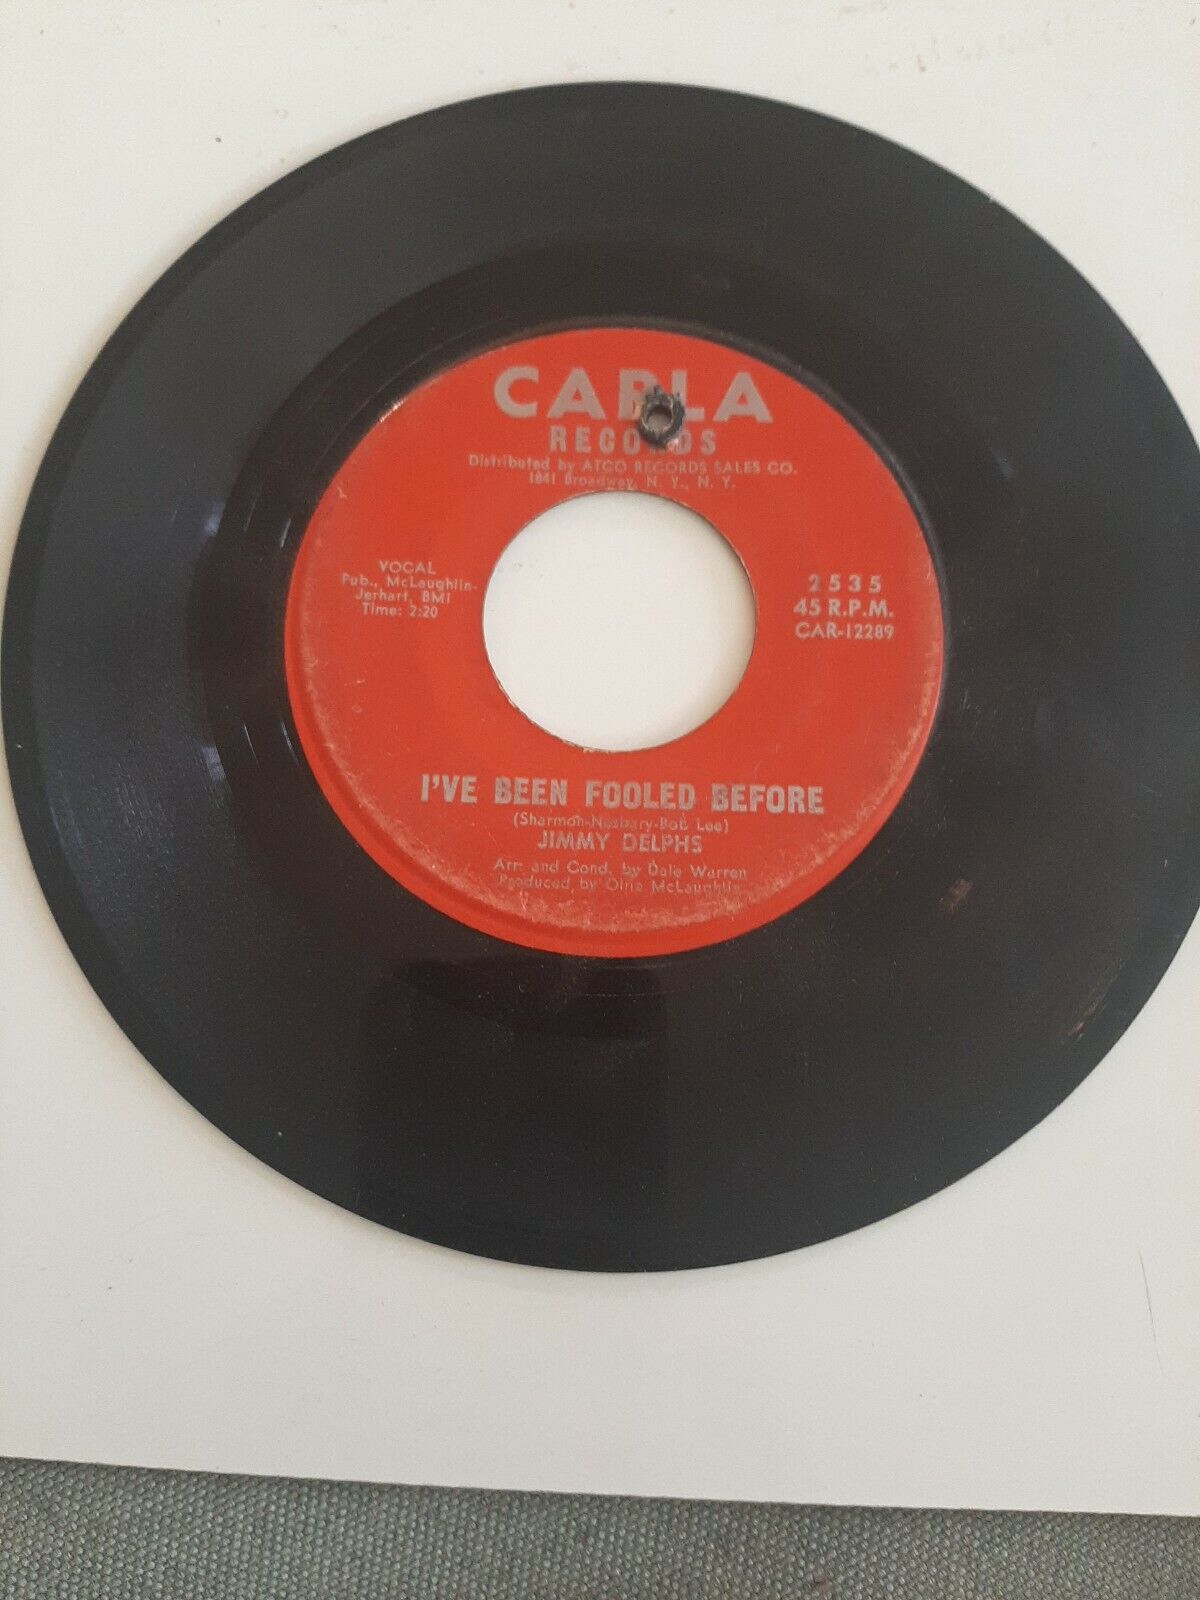 45 Record Soul Funk Jimmy Delphs I've Been Fooled Before/Almost VG